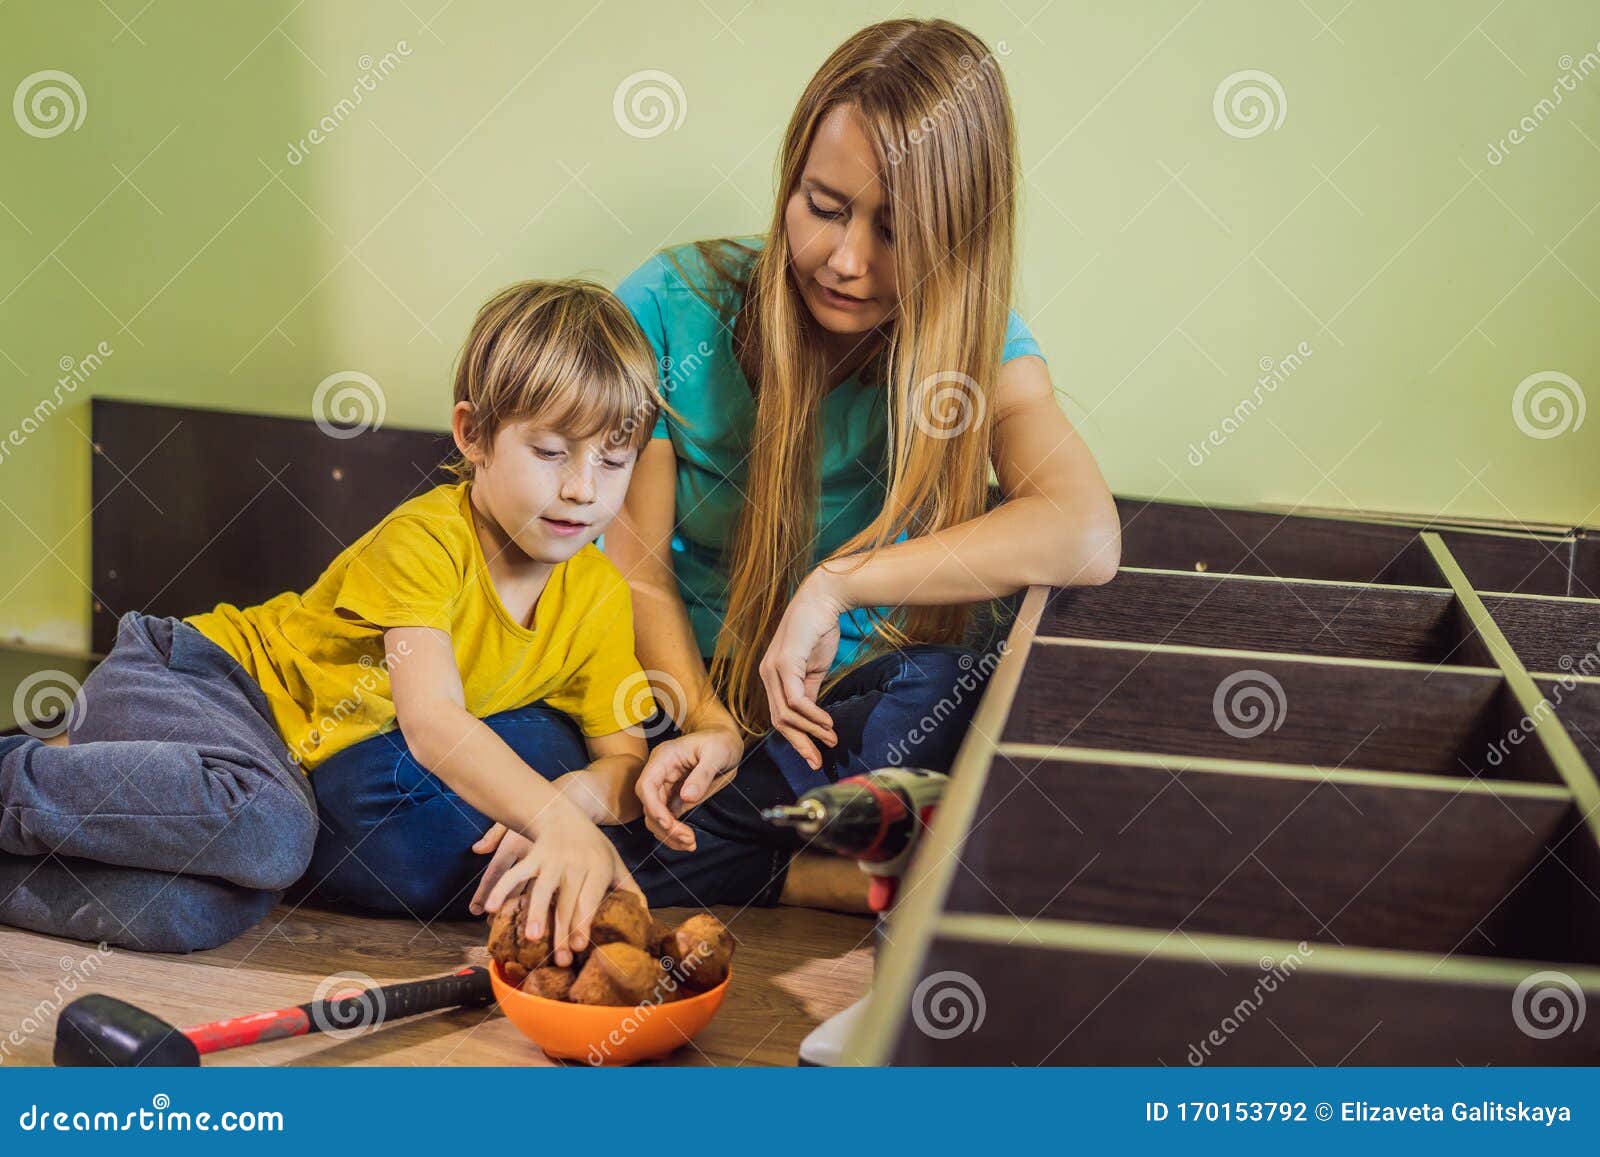 Mother And Son Assembling Furniture They Take A Break And Eat Cupcakes